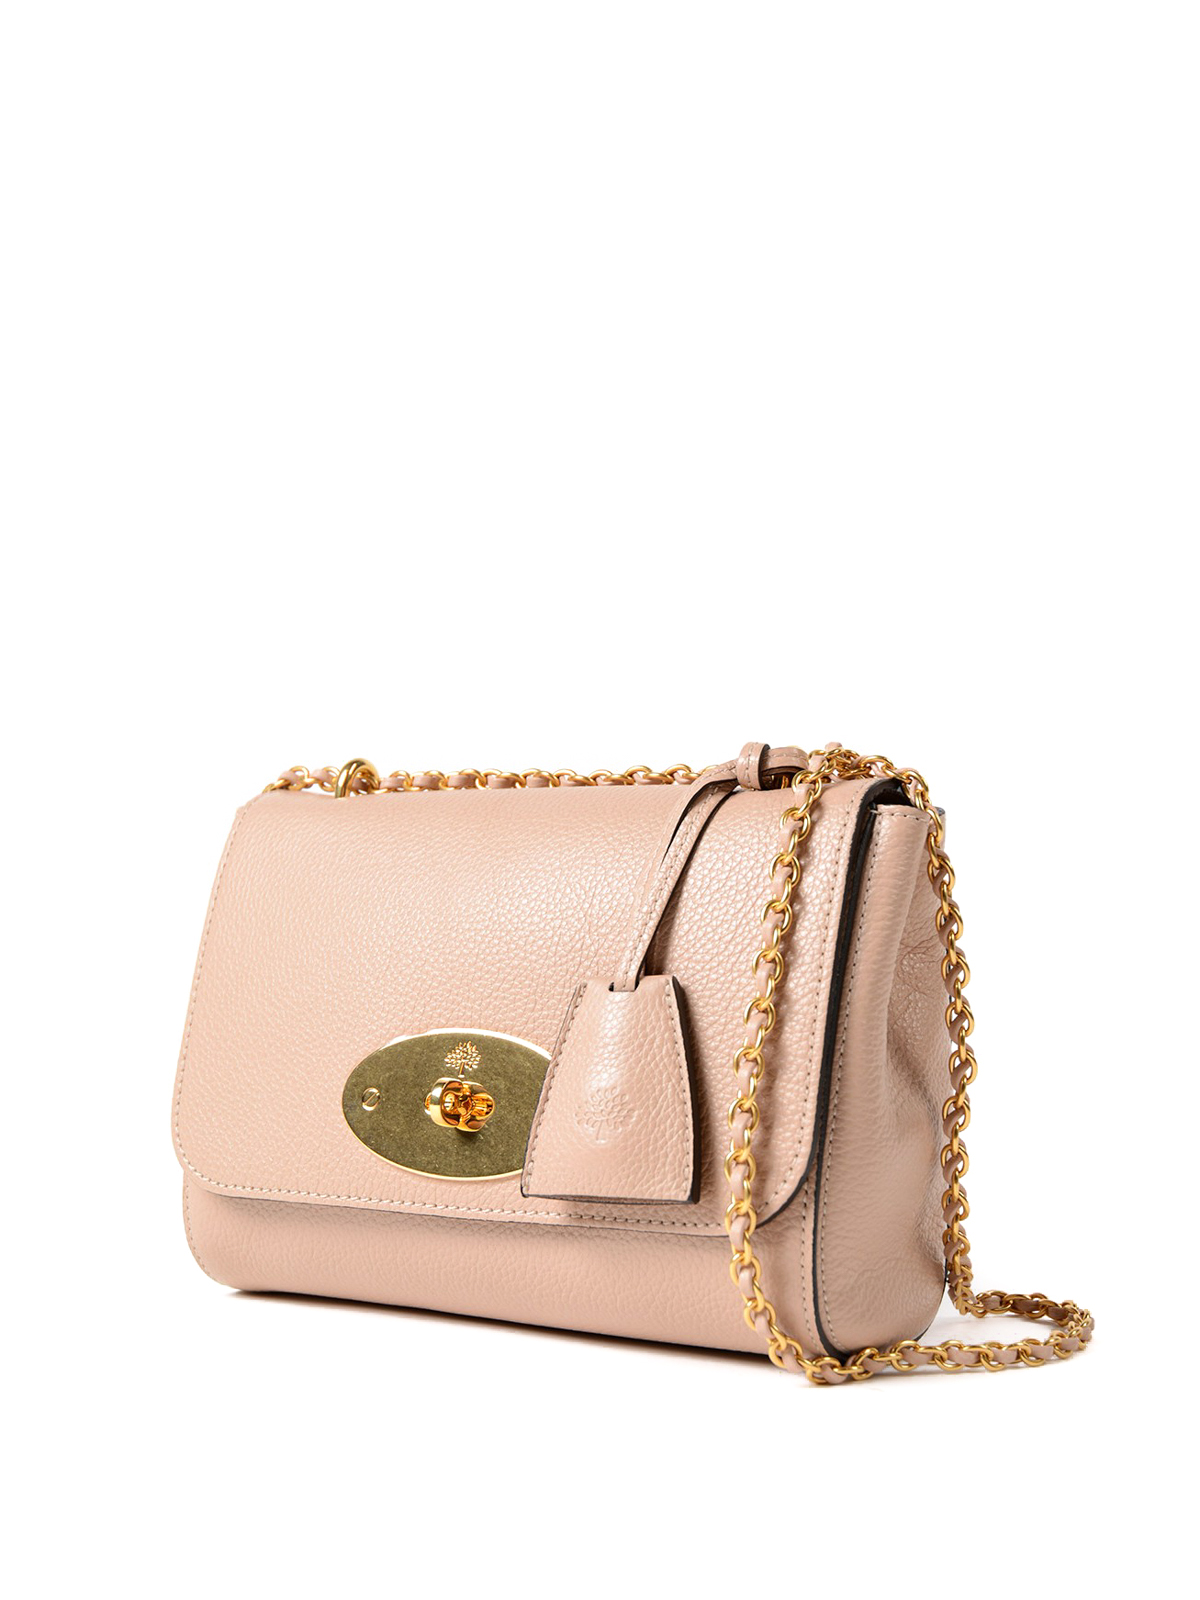 Mulberry - Lily pale pink leather small bag - cross body bags ...